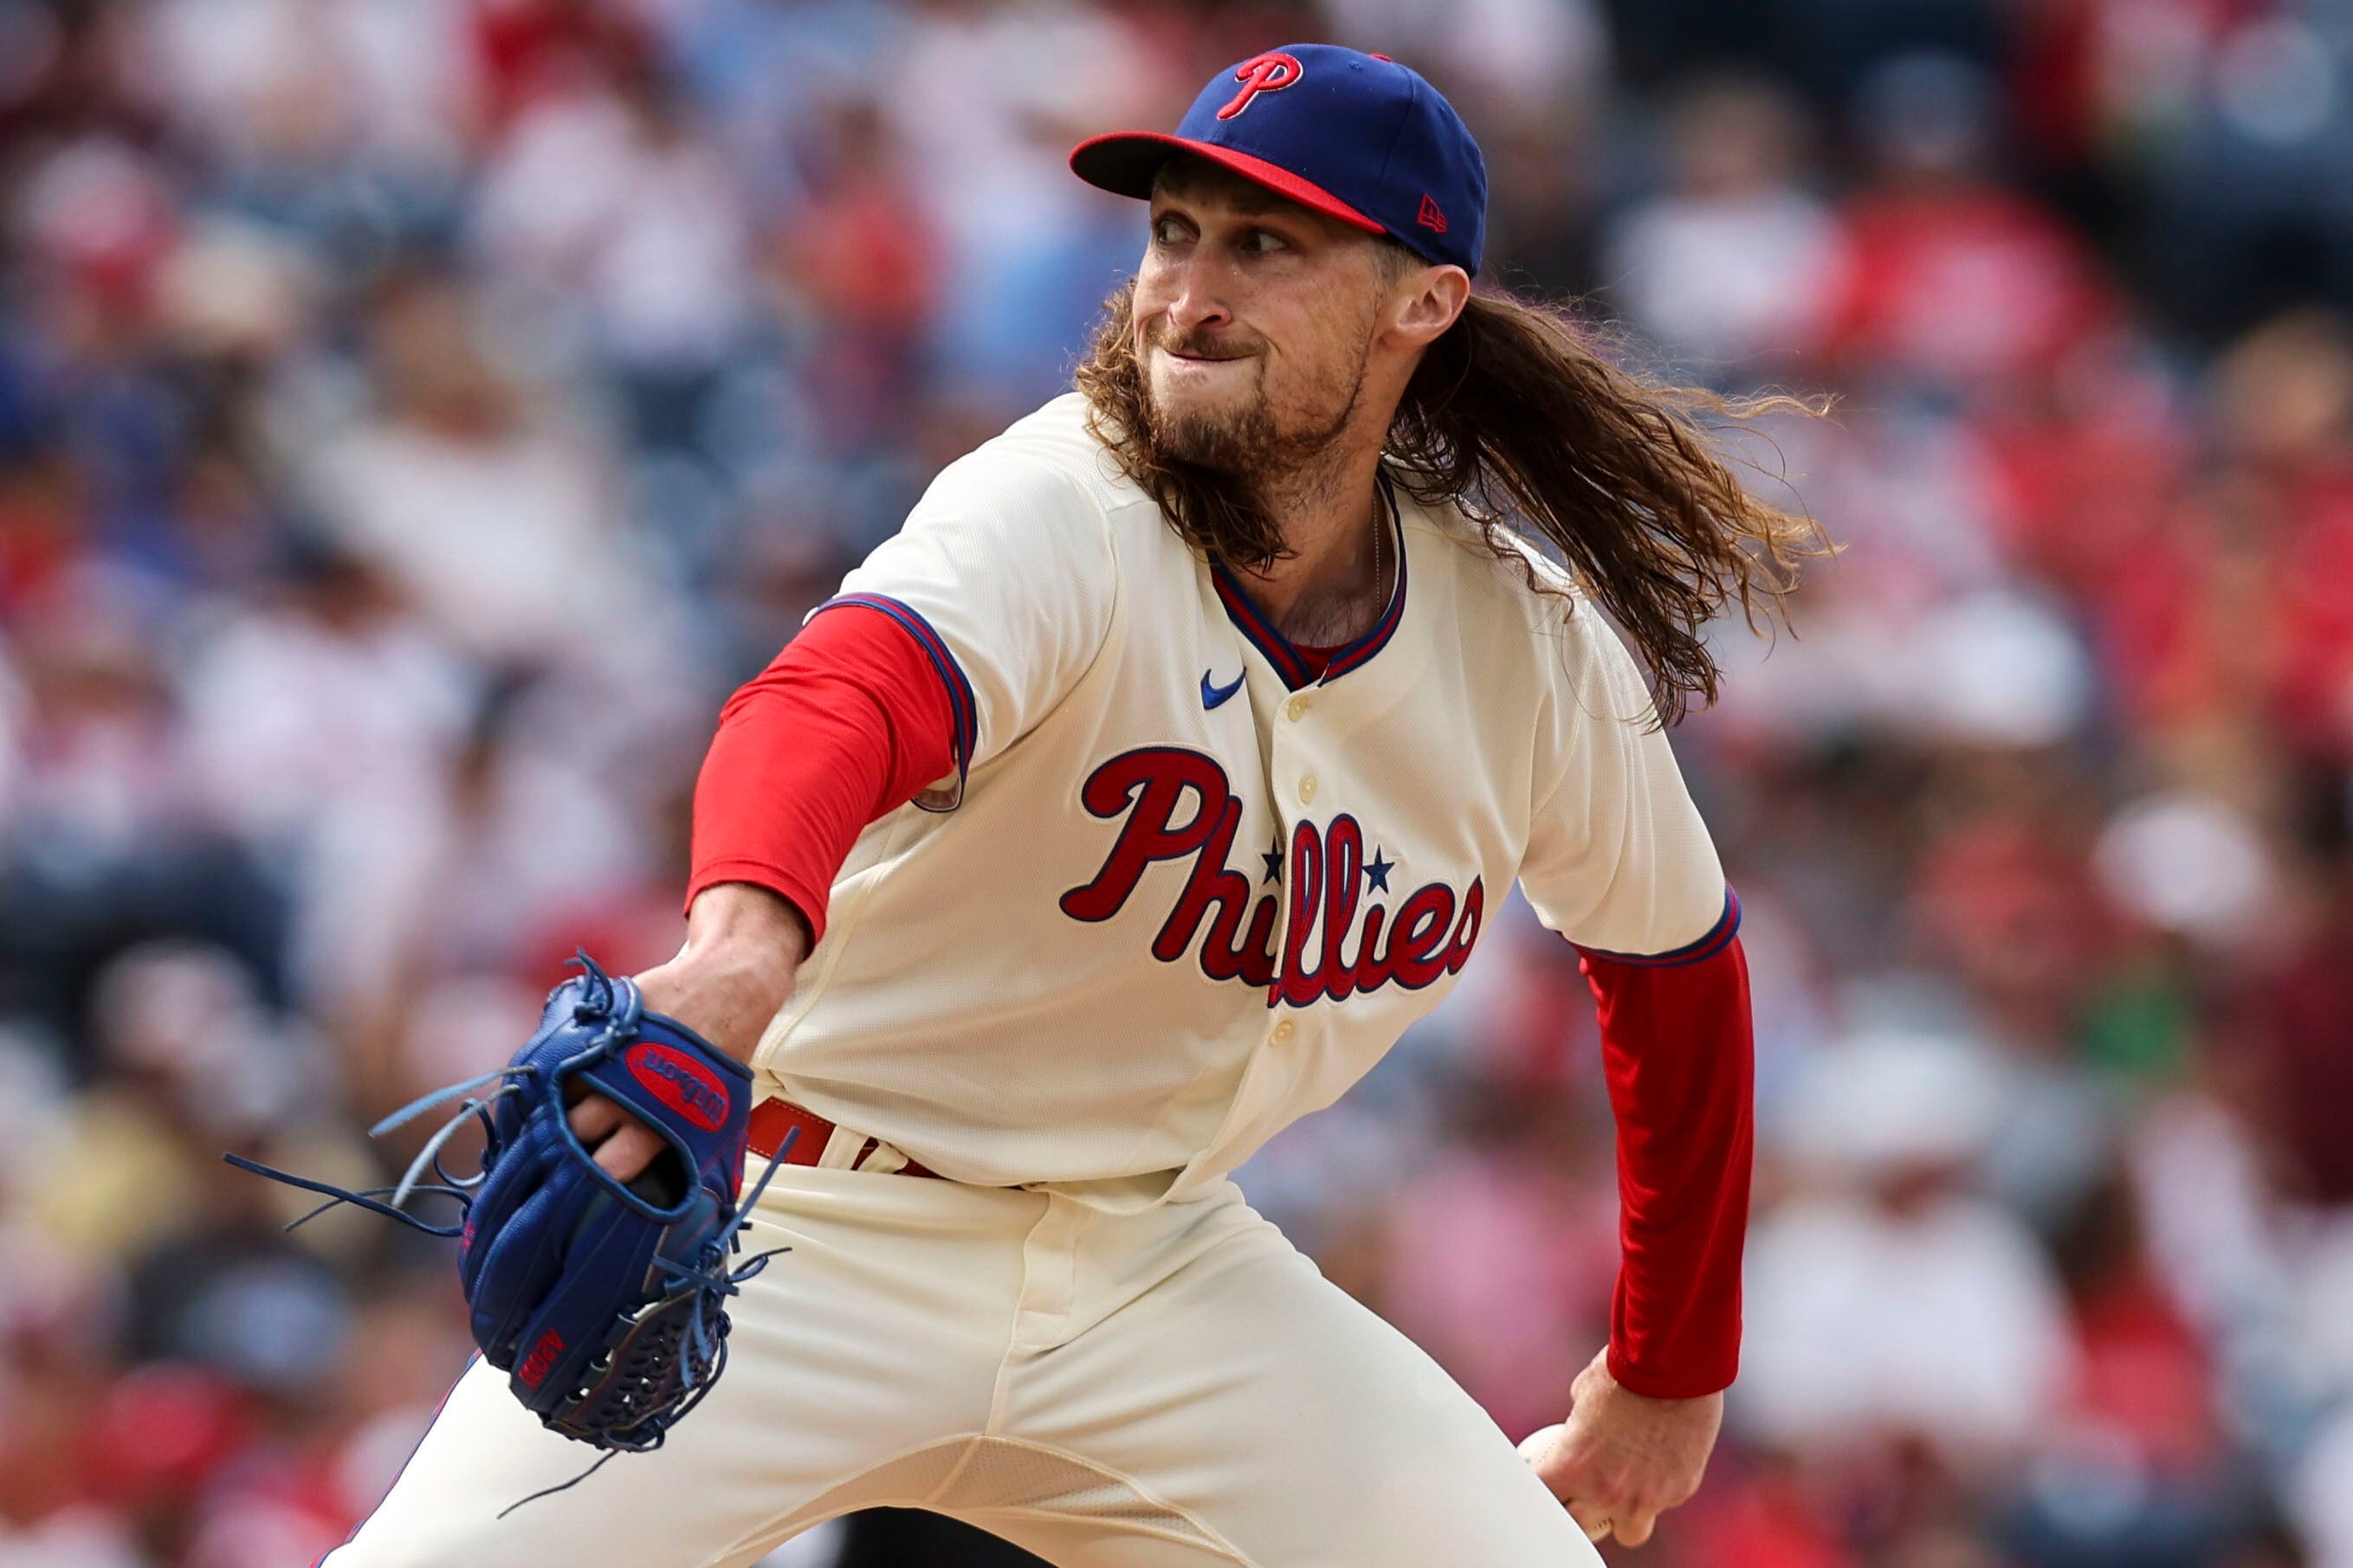 Ranger Suárez is the unsung hero of the Phillies' rotation in the MLB  playoffs